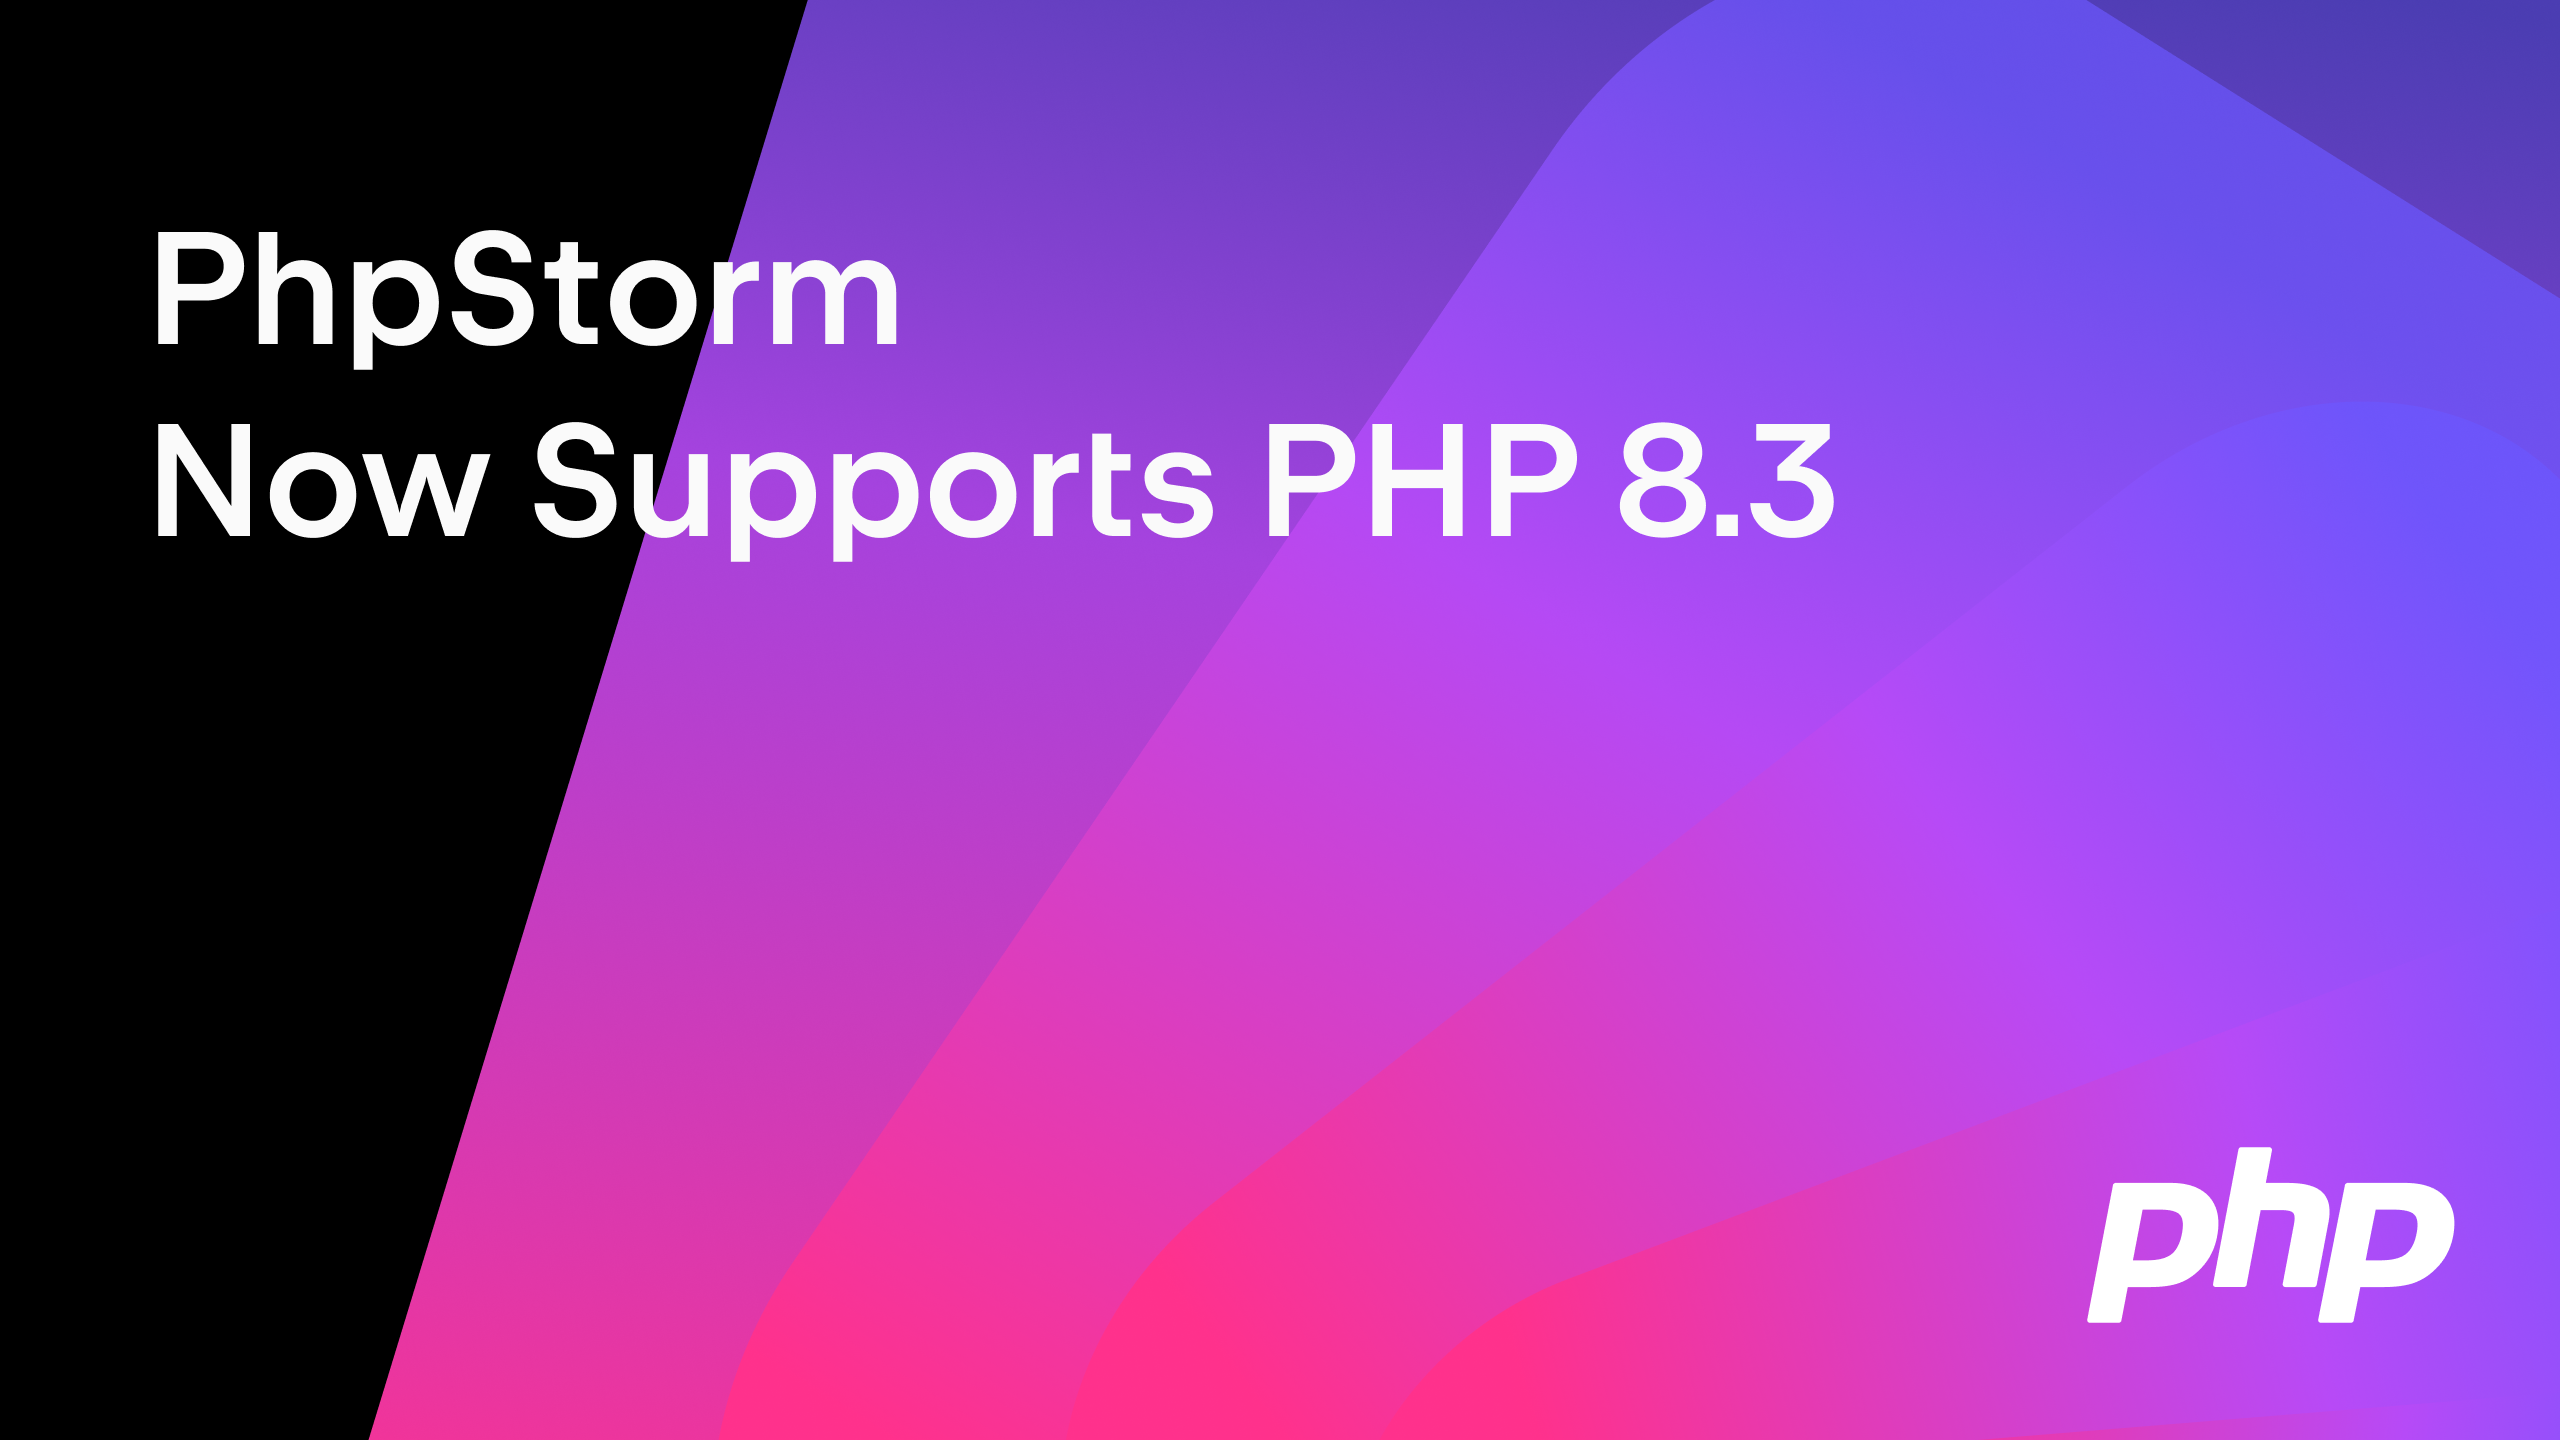 PhpStorm Now Supports PHP 8.3